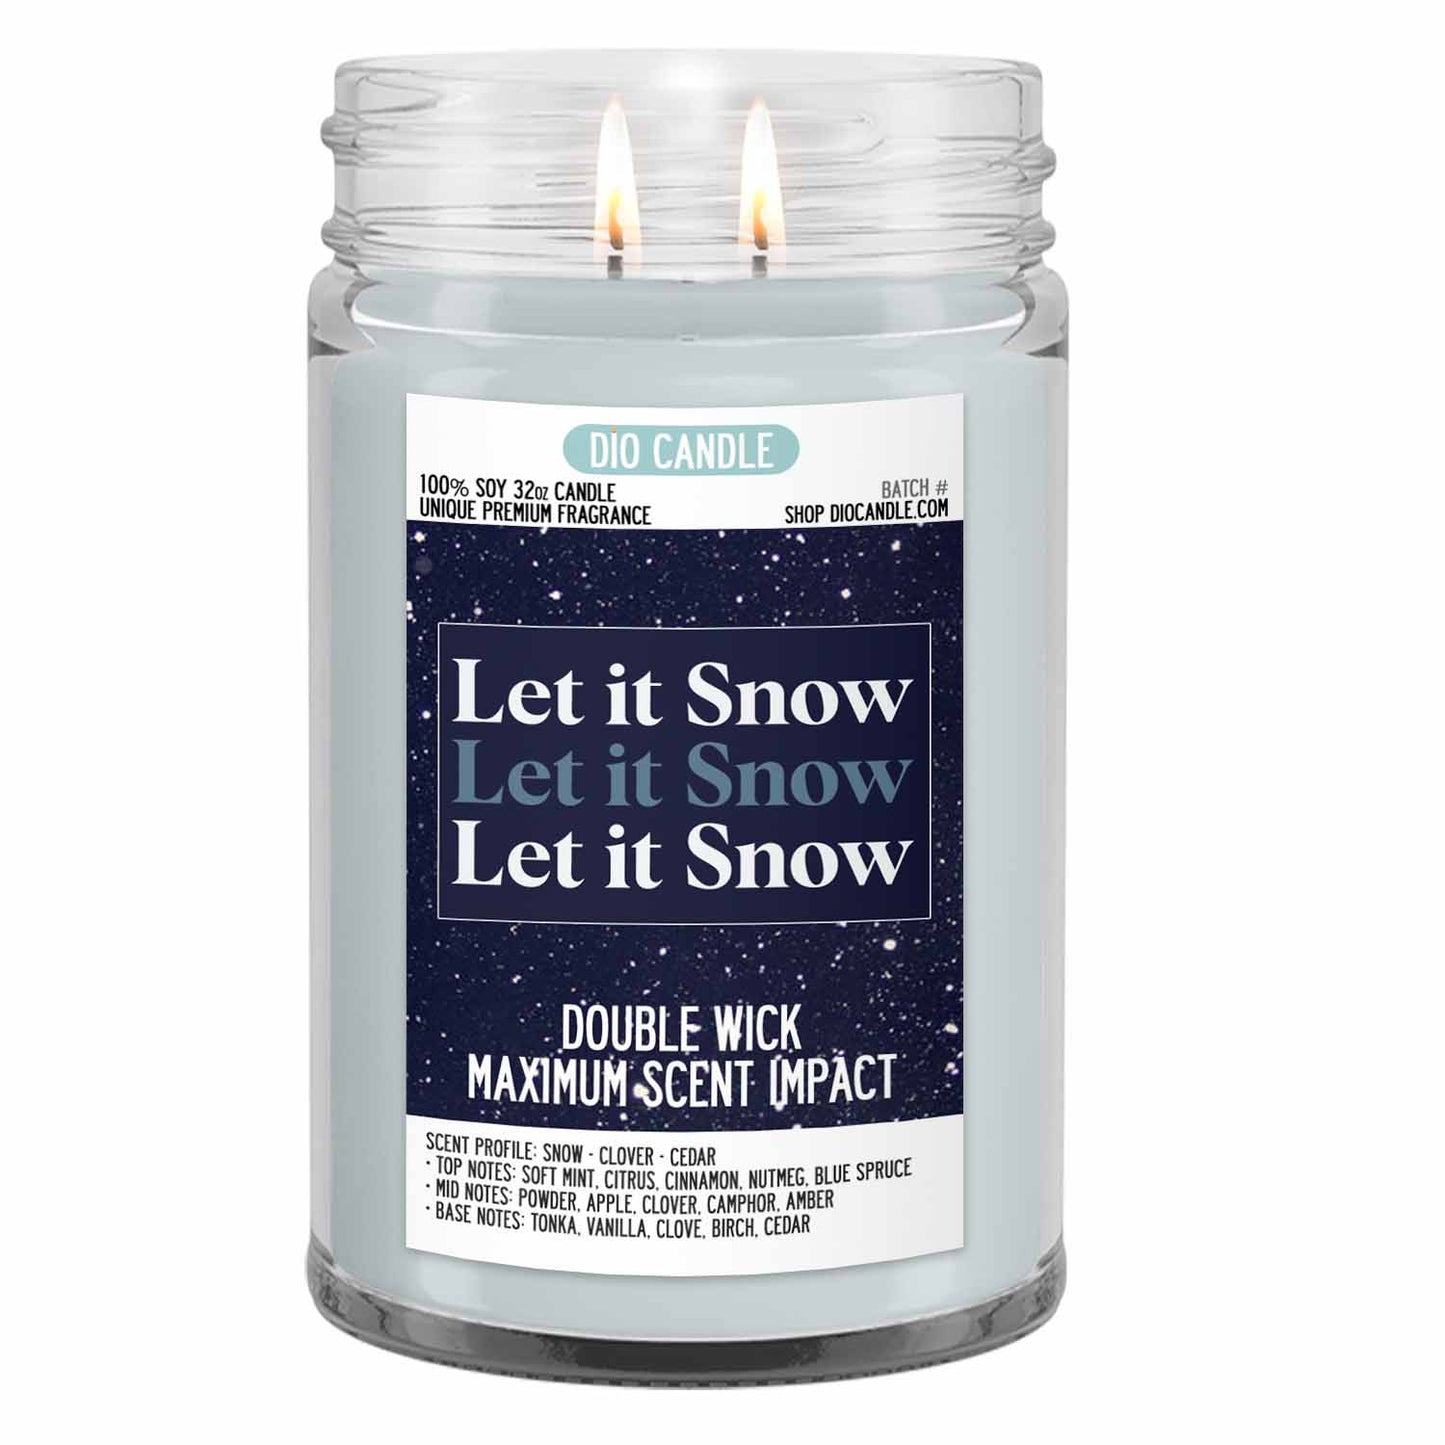 Let it Snow Candle